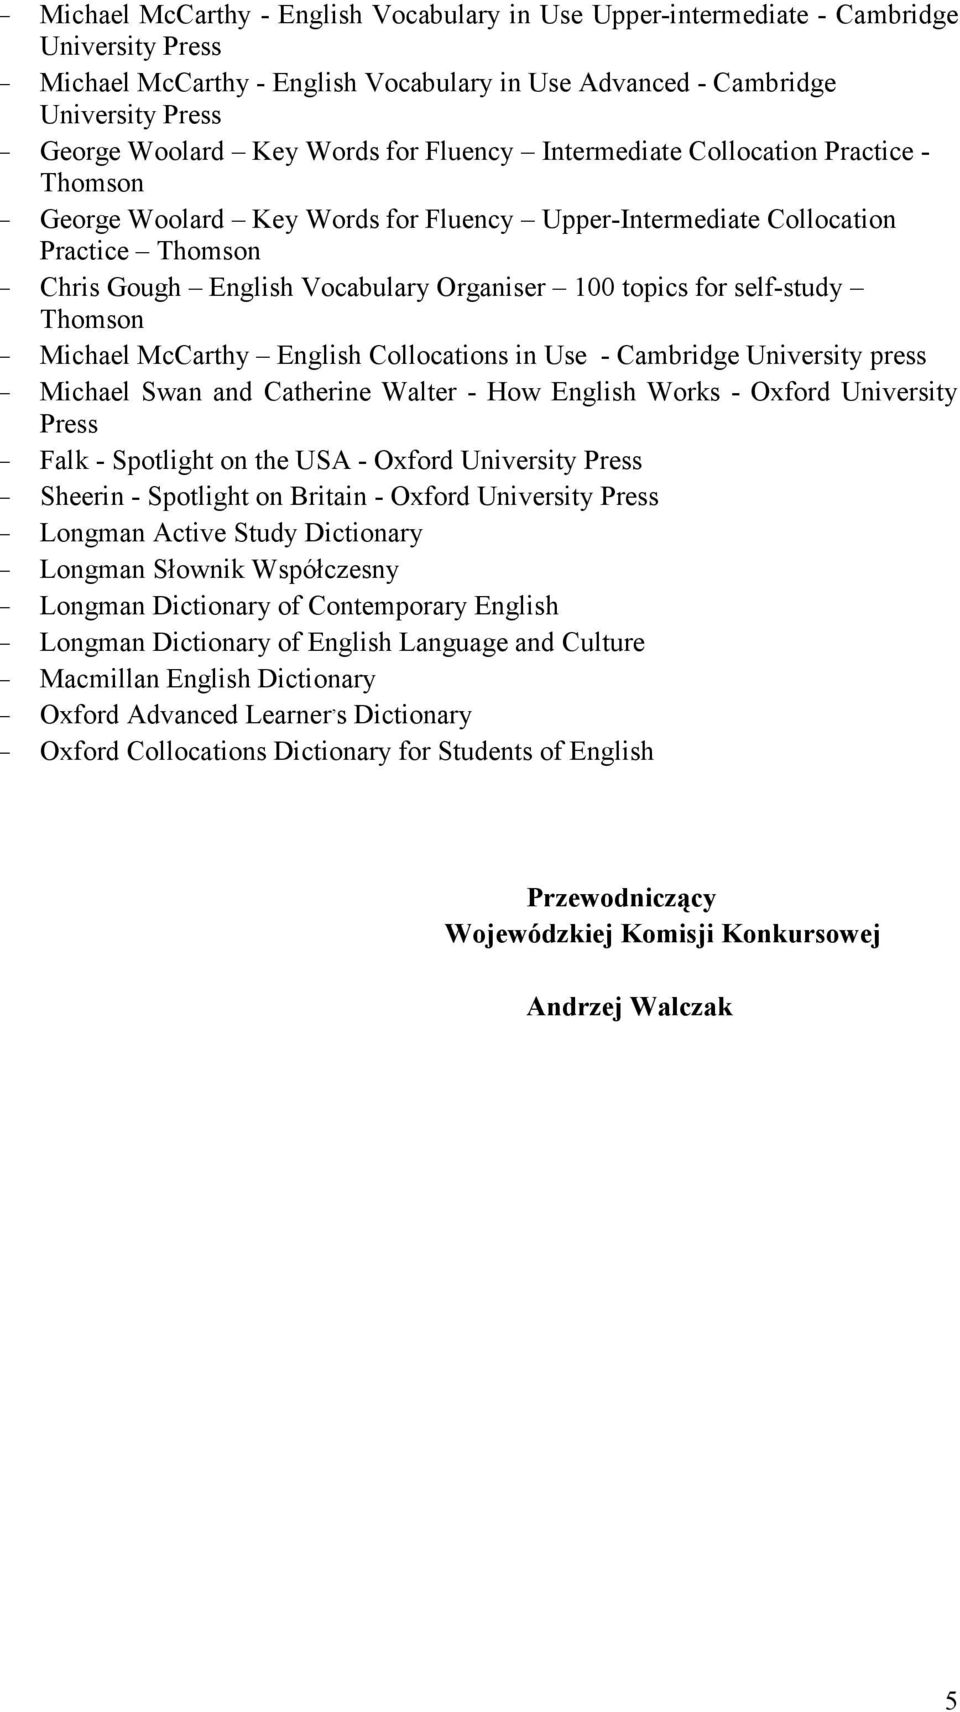 topics for self-study Thomson - Michael McCarthy English Collocations in Use - Cambridge University press - Michael Swan and Catherine Walter - How English Works - Oxford University Press - Falk -